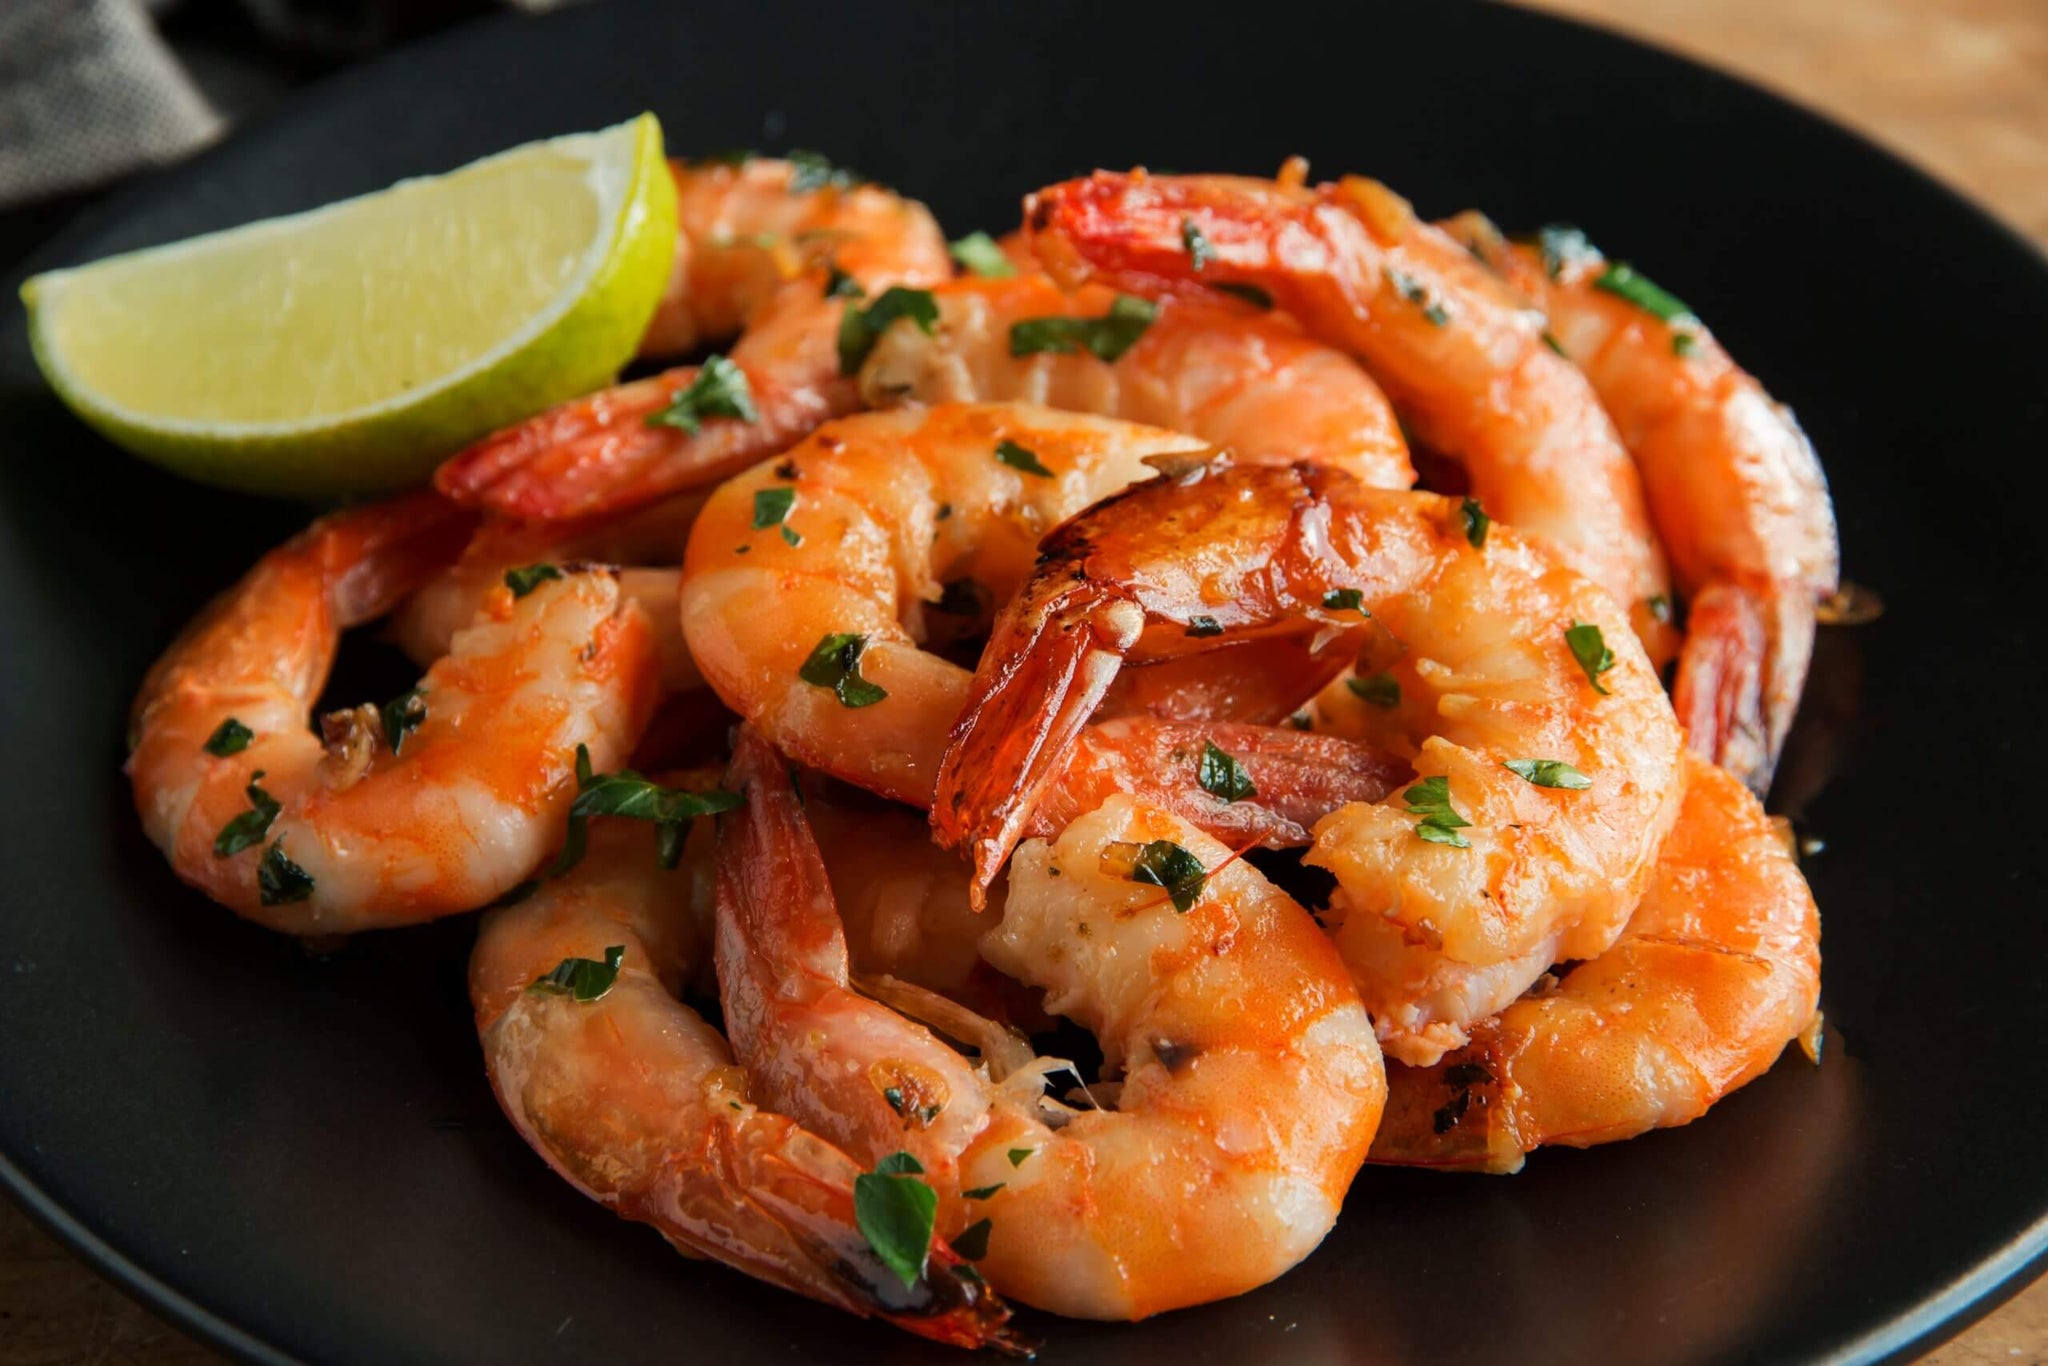 Shrimp - Cooked & Peeled, Tail-On